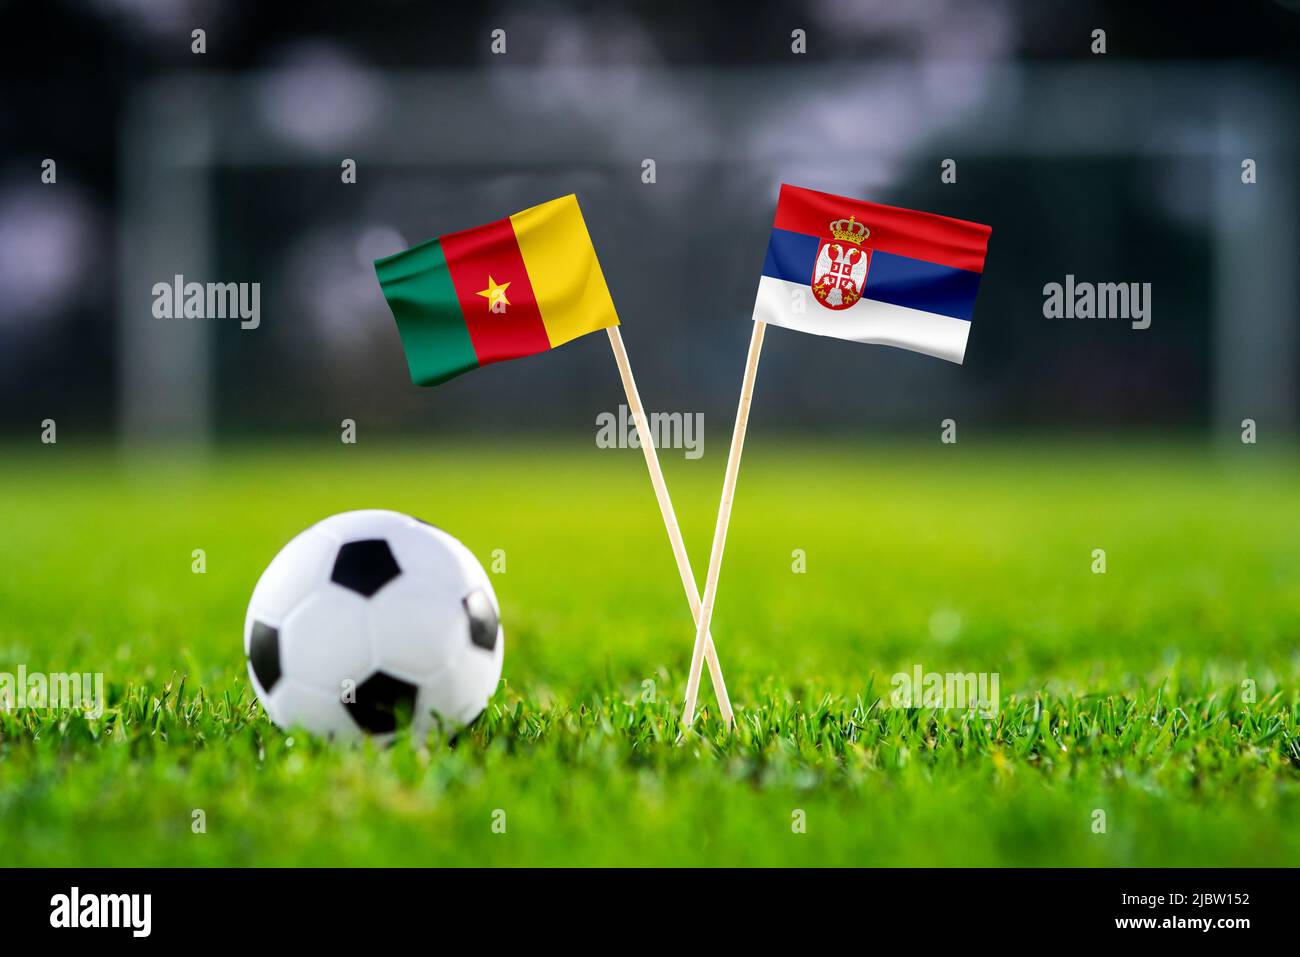 Cameroon vs. Serbia, Al Janoub, Football match wallpaper, Handmade national flags and soccer ball on green grass. Football stadium in background. Blac Stock Photo